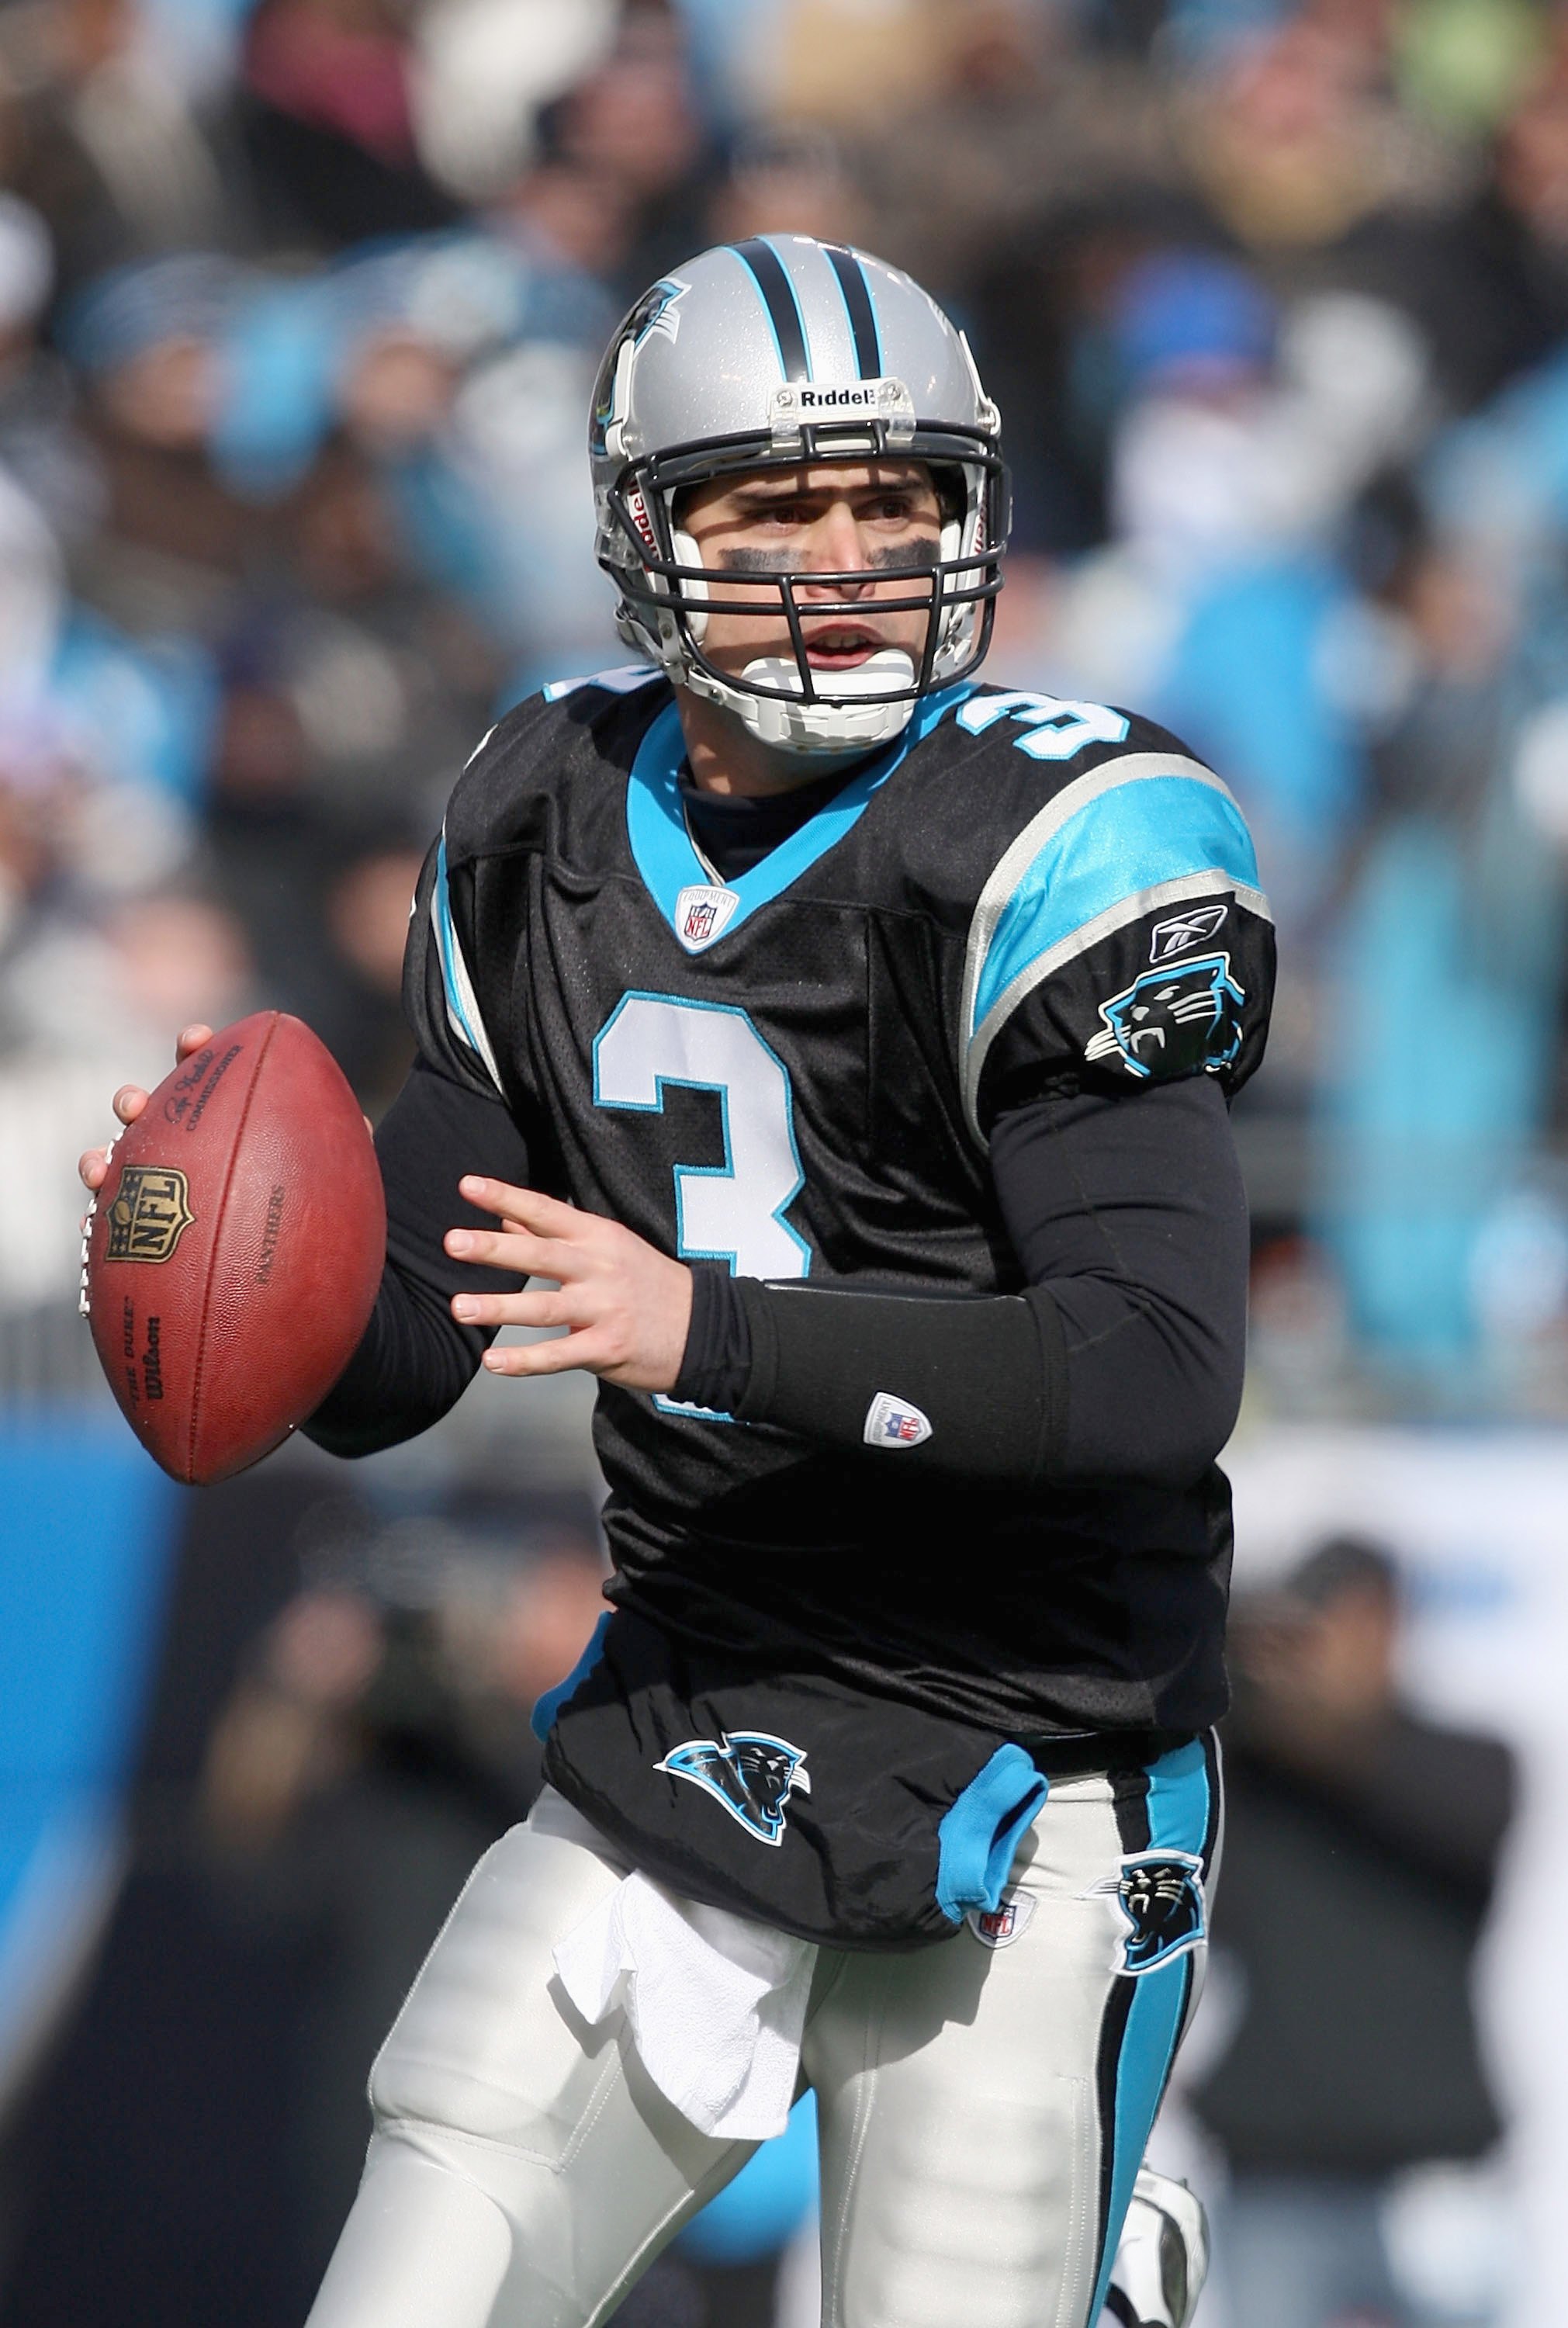 CHARLOTTE, NC - JANUARY 03:  Quarterback Matt Moore #3 of the Carolina Panthers looks to pass the ball during the game against the New Orleans Saints at Bank of America Stadium on January 3, 2010 in Charlotte, North Carolina.  (Photo by Streeter Lecka/Get